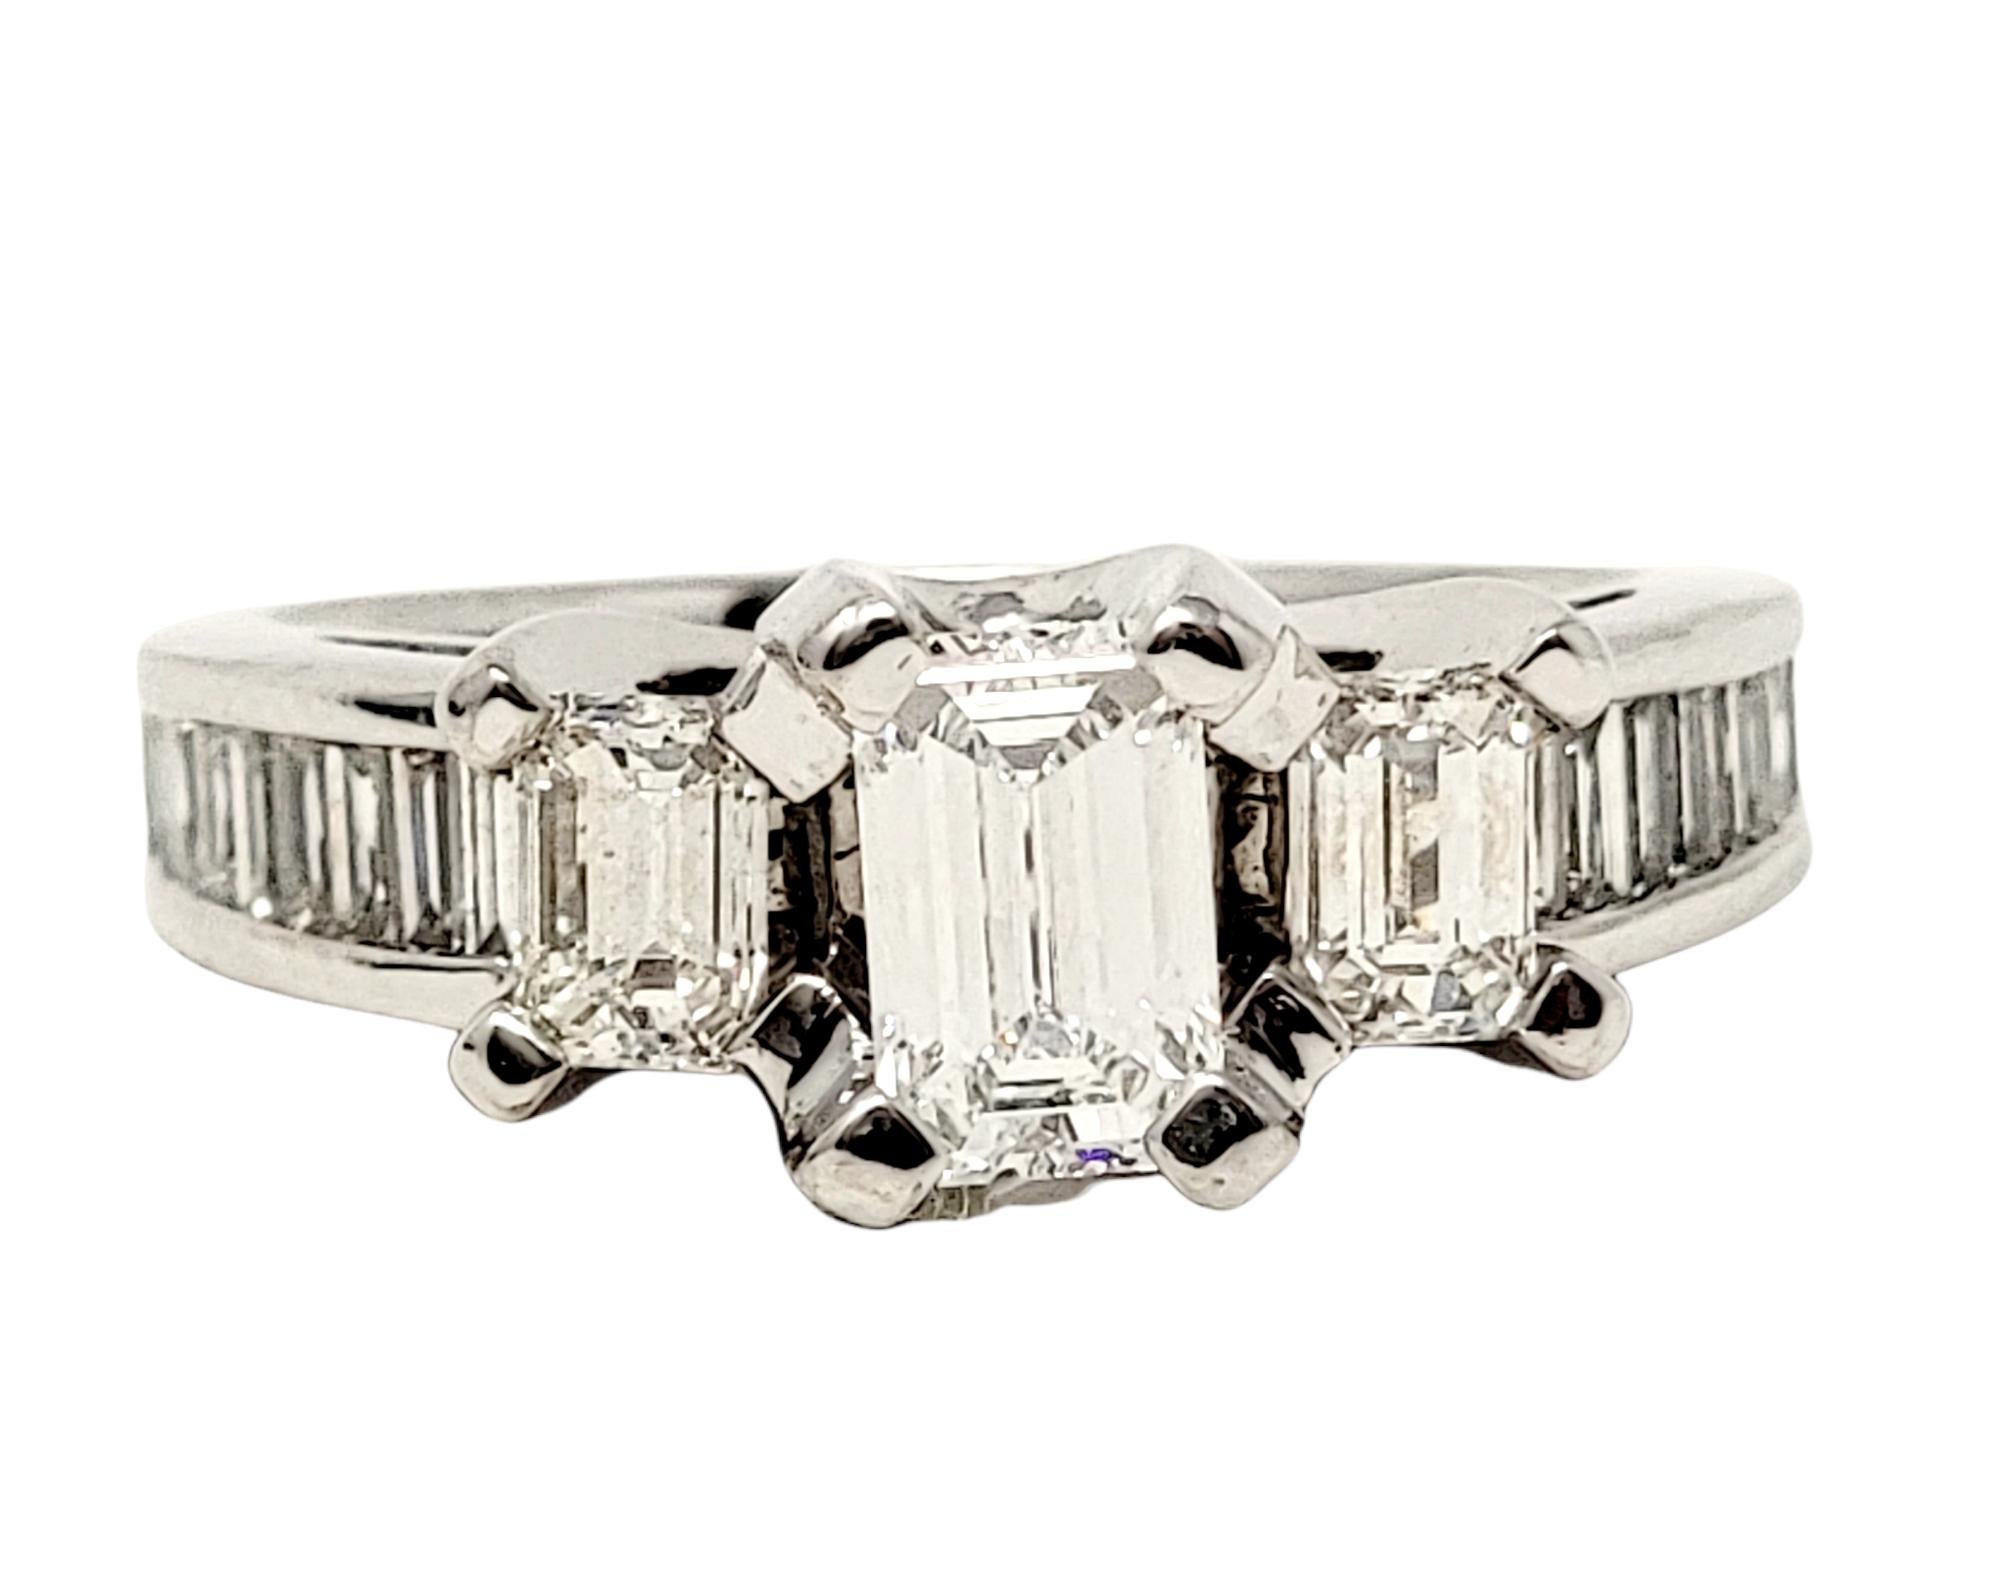 Ring size: 6.75

Absolutely gorgeous contemporary diamond engagement ring. This 3 stone beauty features a single prong set  .70 carat emerald cut diamond flanked by 2 smaller emerald cut diamonds. Along the top half of the shank are additional